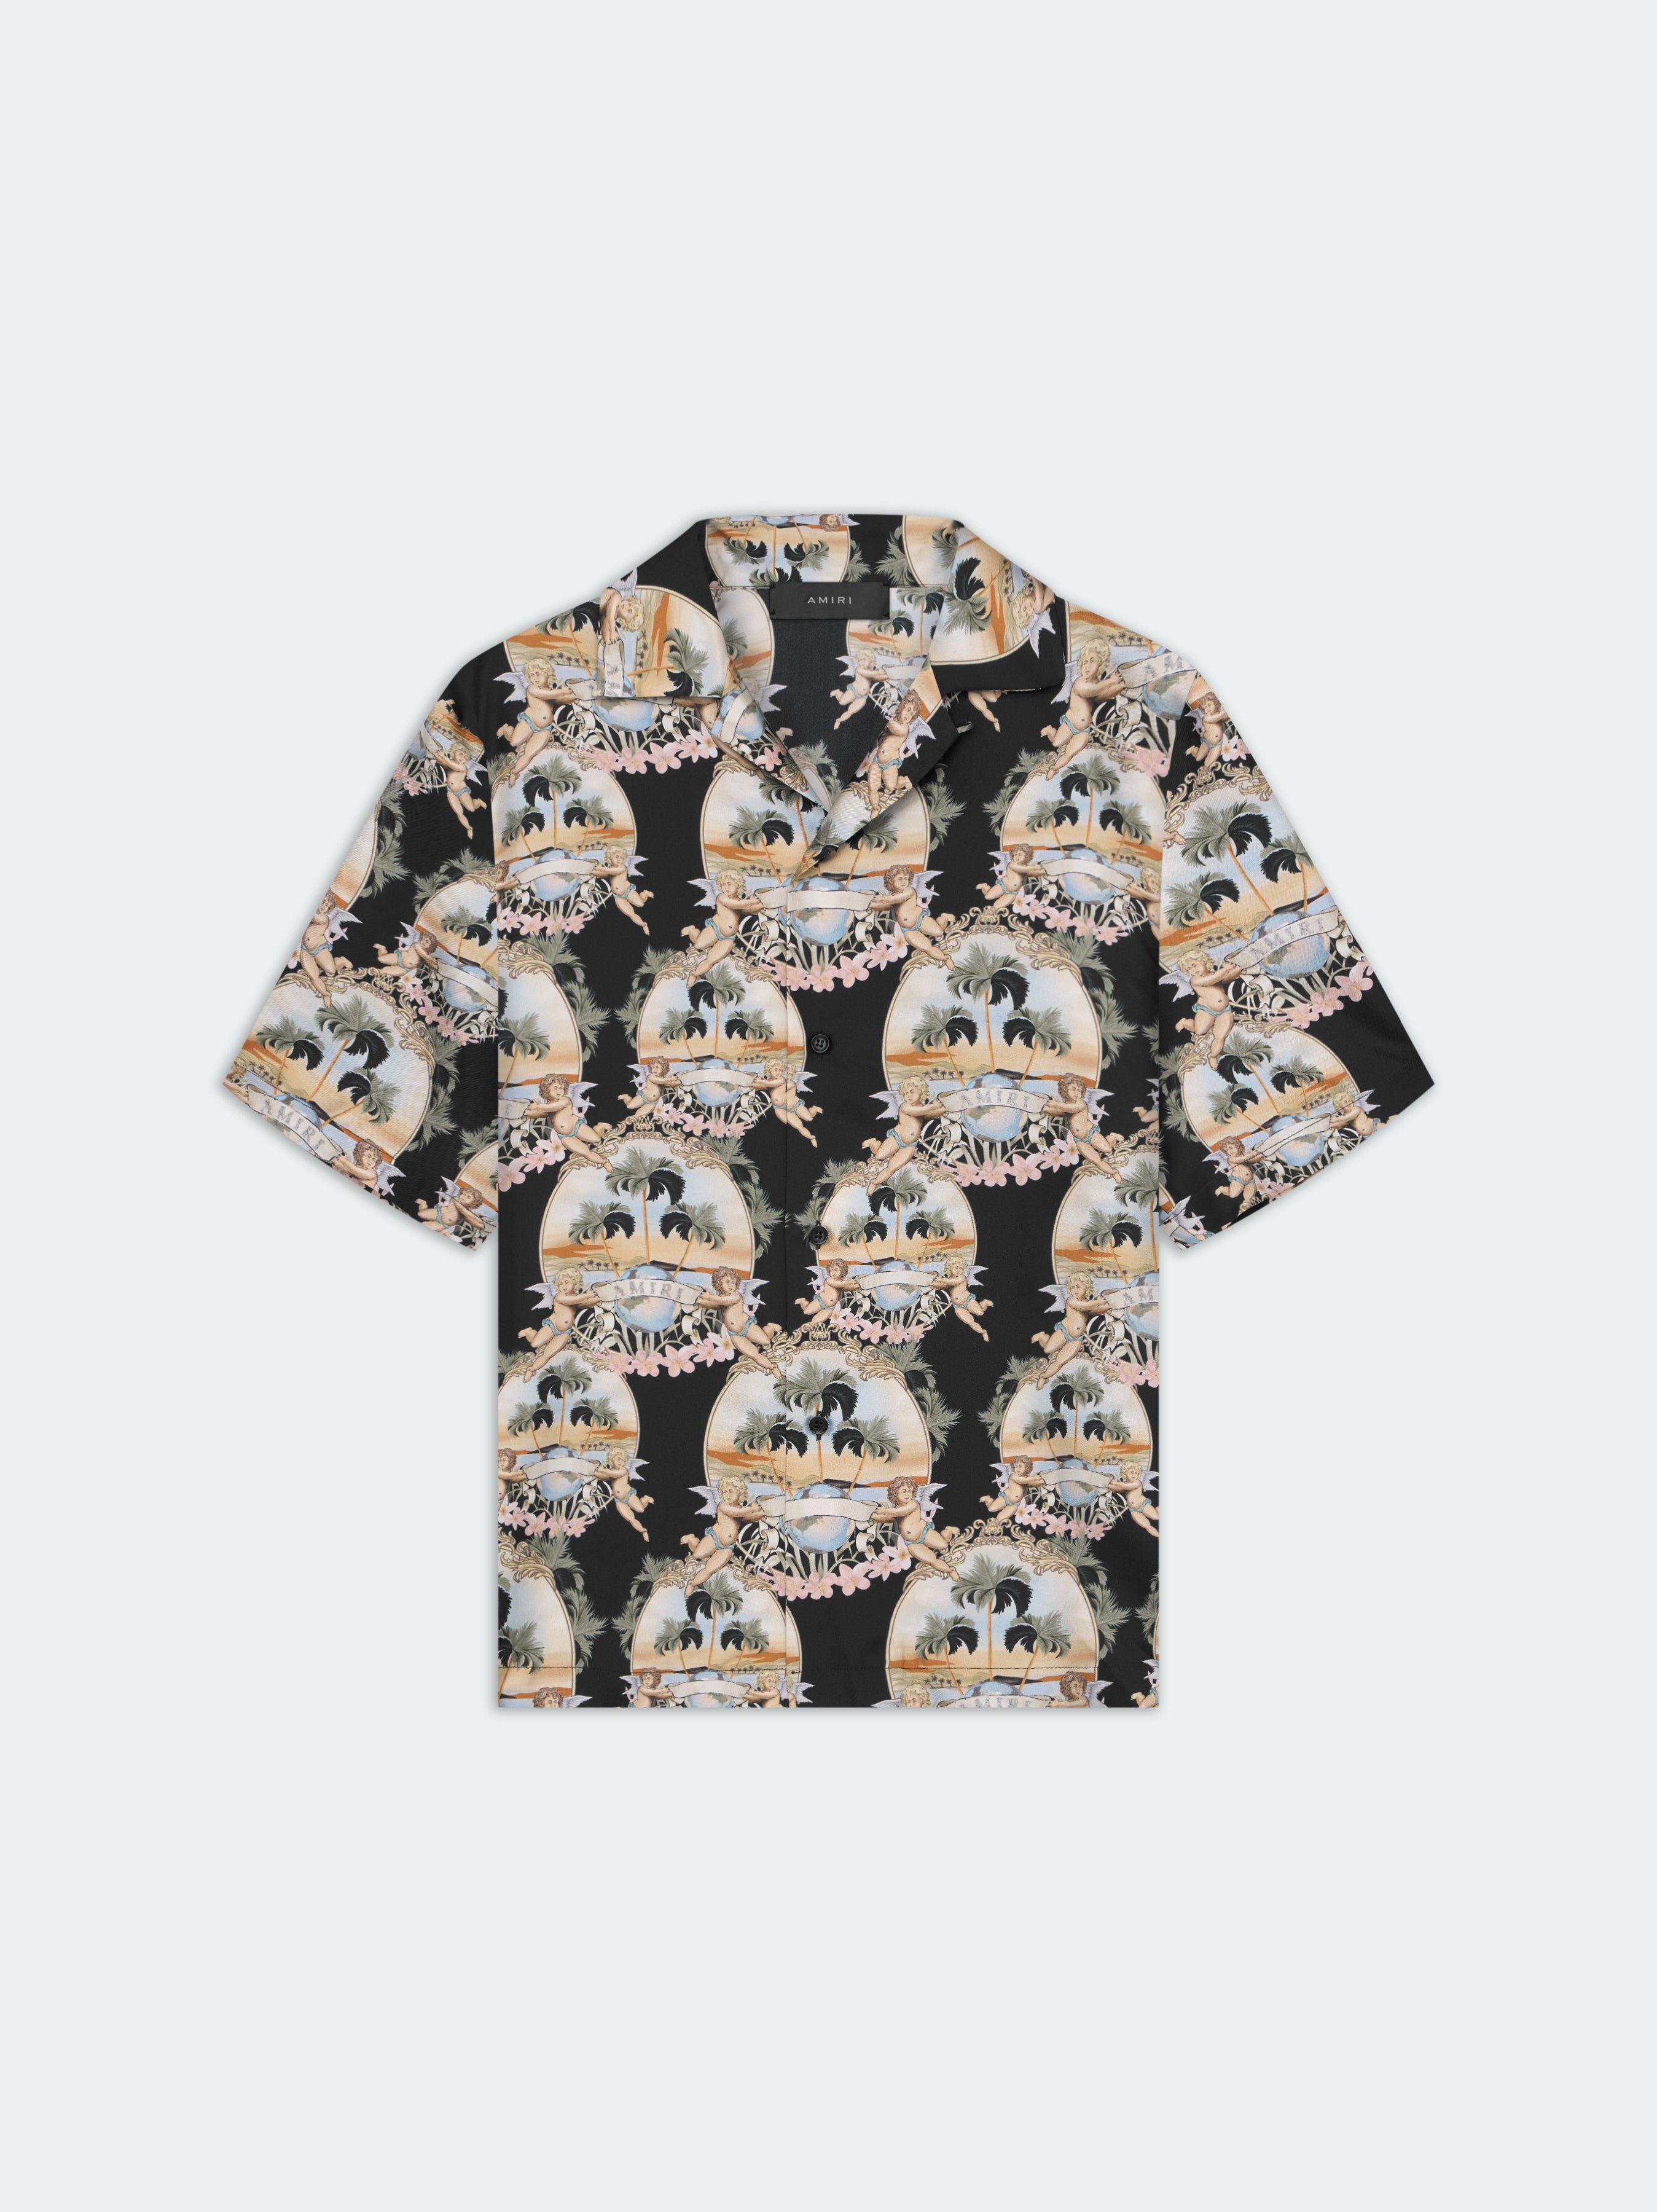 Product ALL OVER PALM BOWLING SHIRT - Black featured image